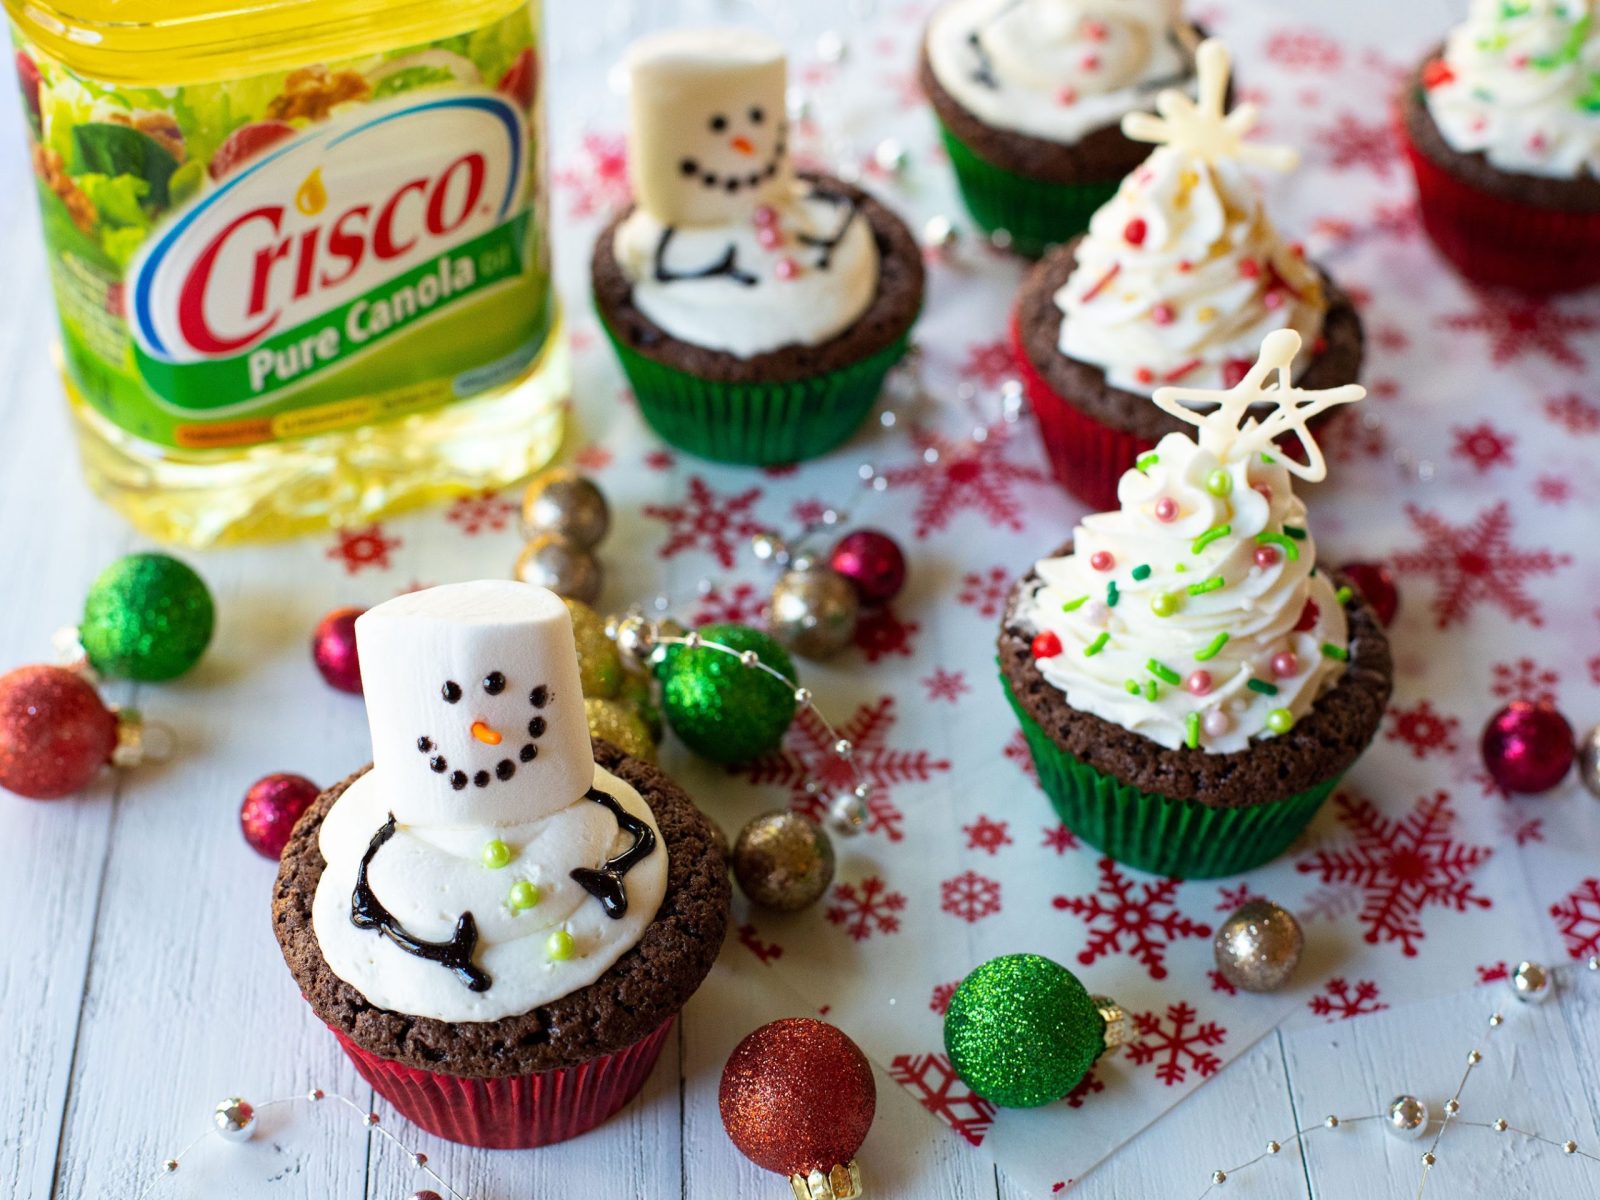 Crisco Oil Is Perfect For All Of Your Holiday Cooking Needs